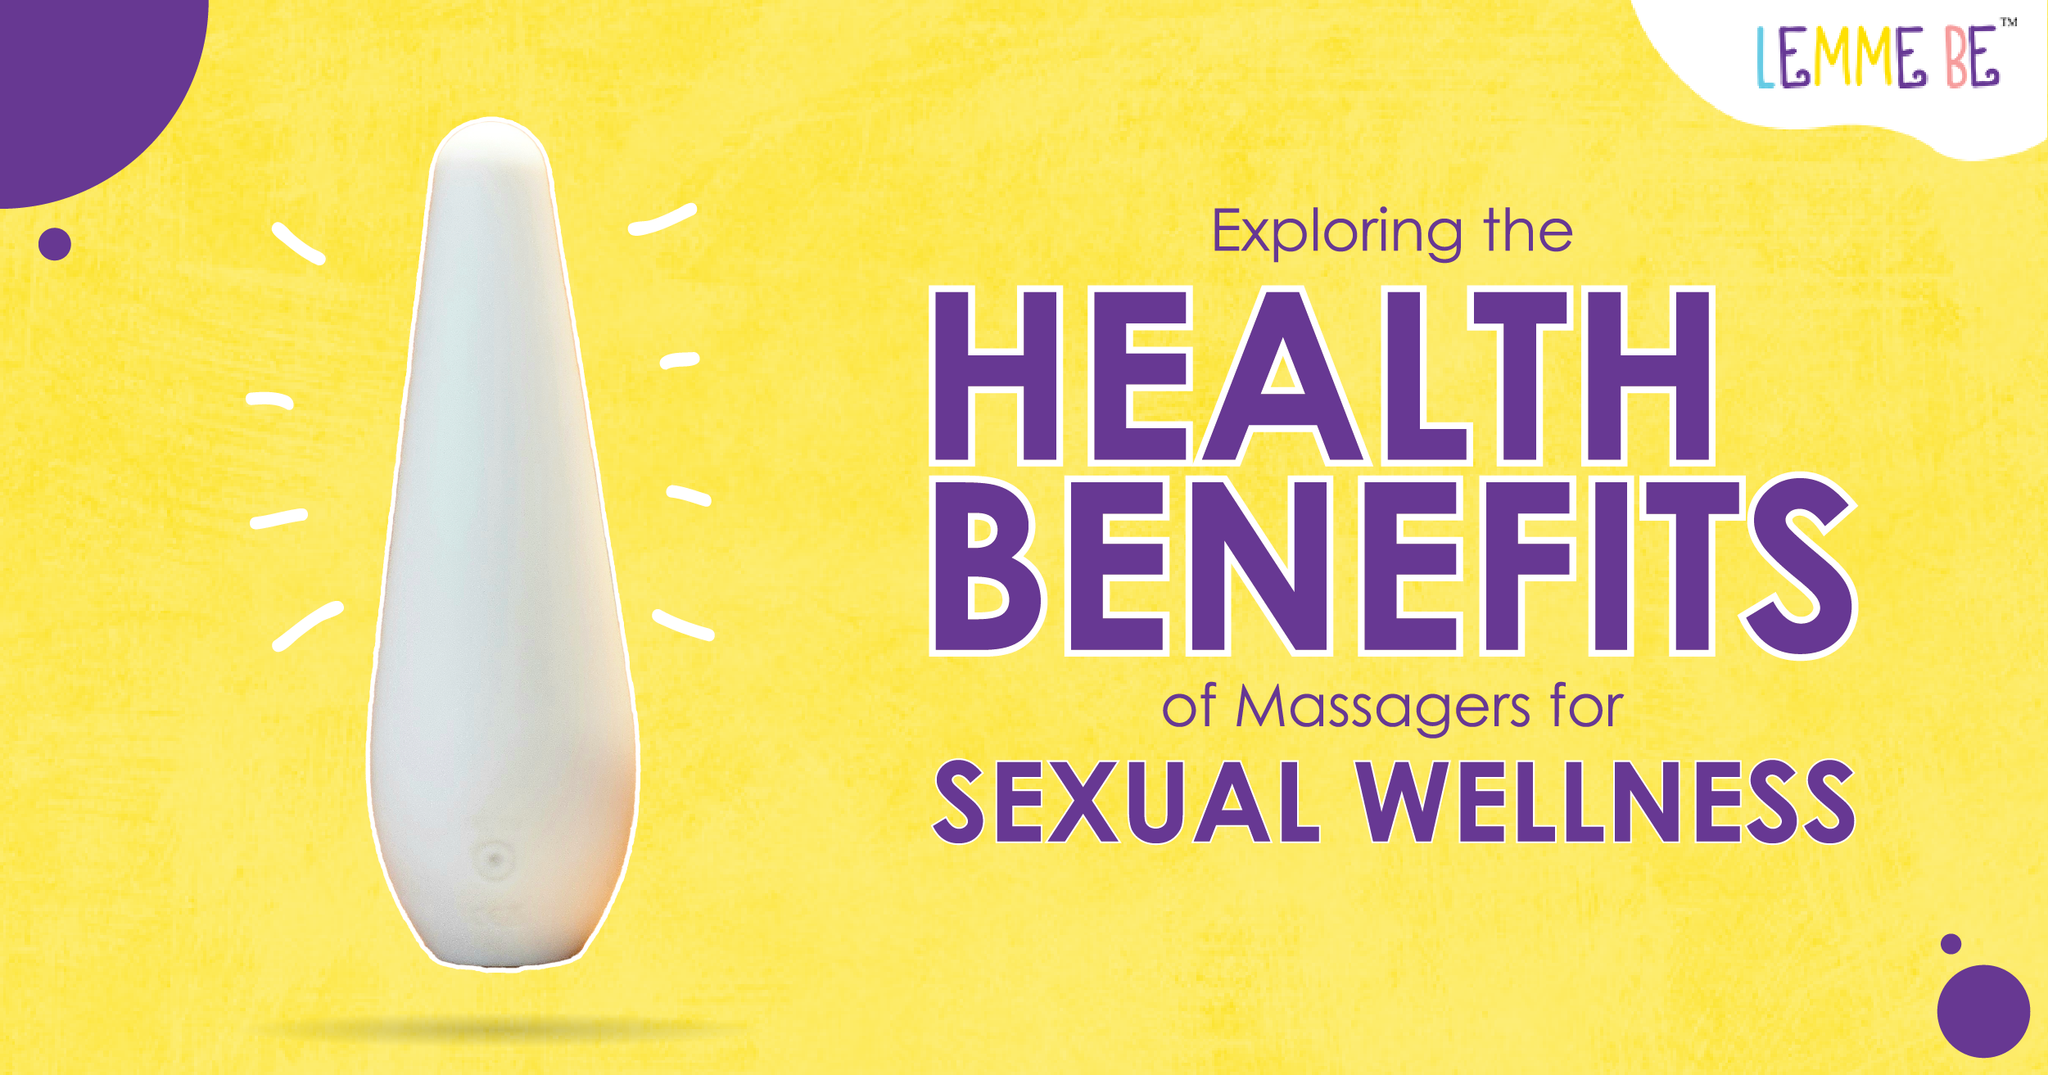 Exploring the Health Benefits of Massagers for Sexual Wellness